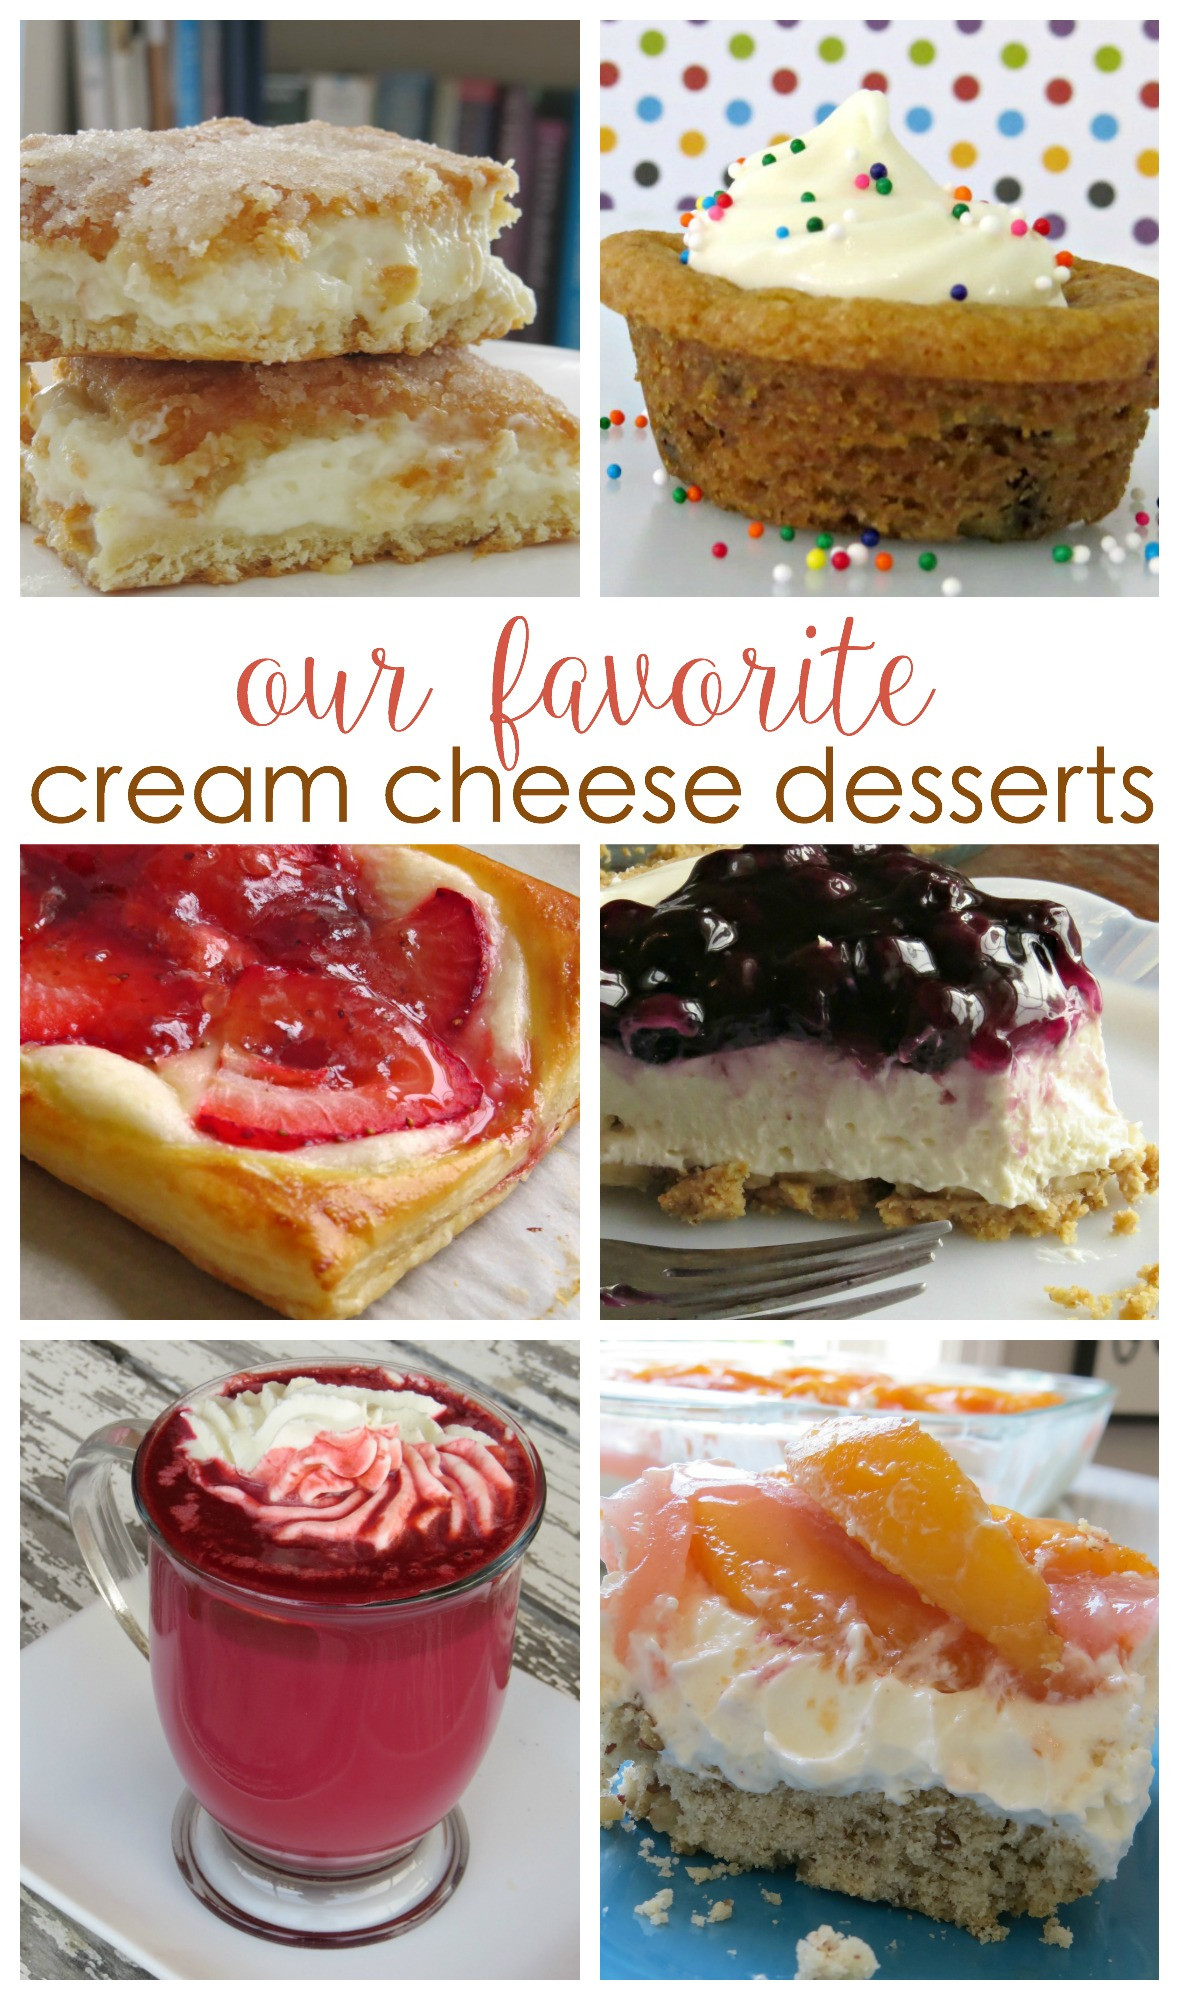 Desserts To Make With Cream Cheese
 Don t Miss These WOW Worthy Cream Cheese Desserts